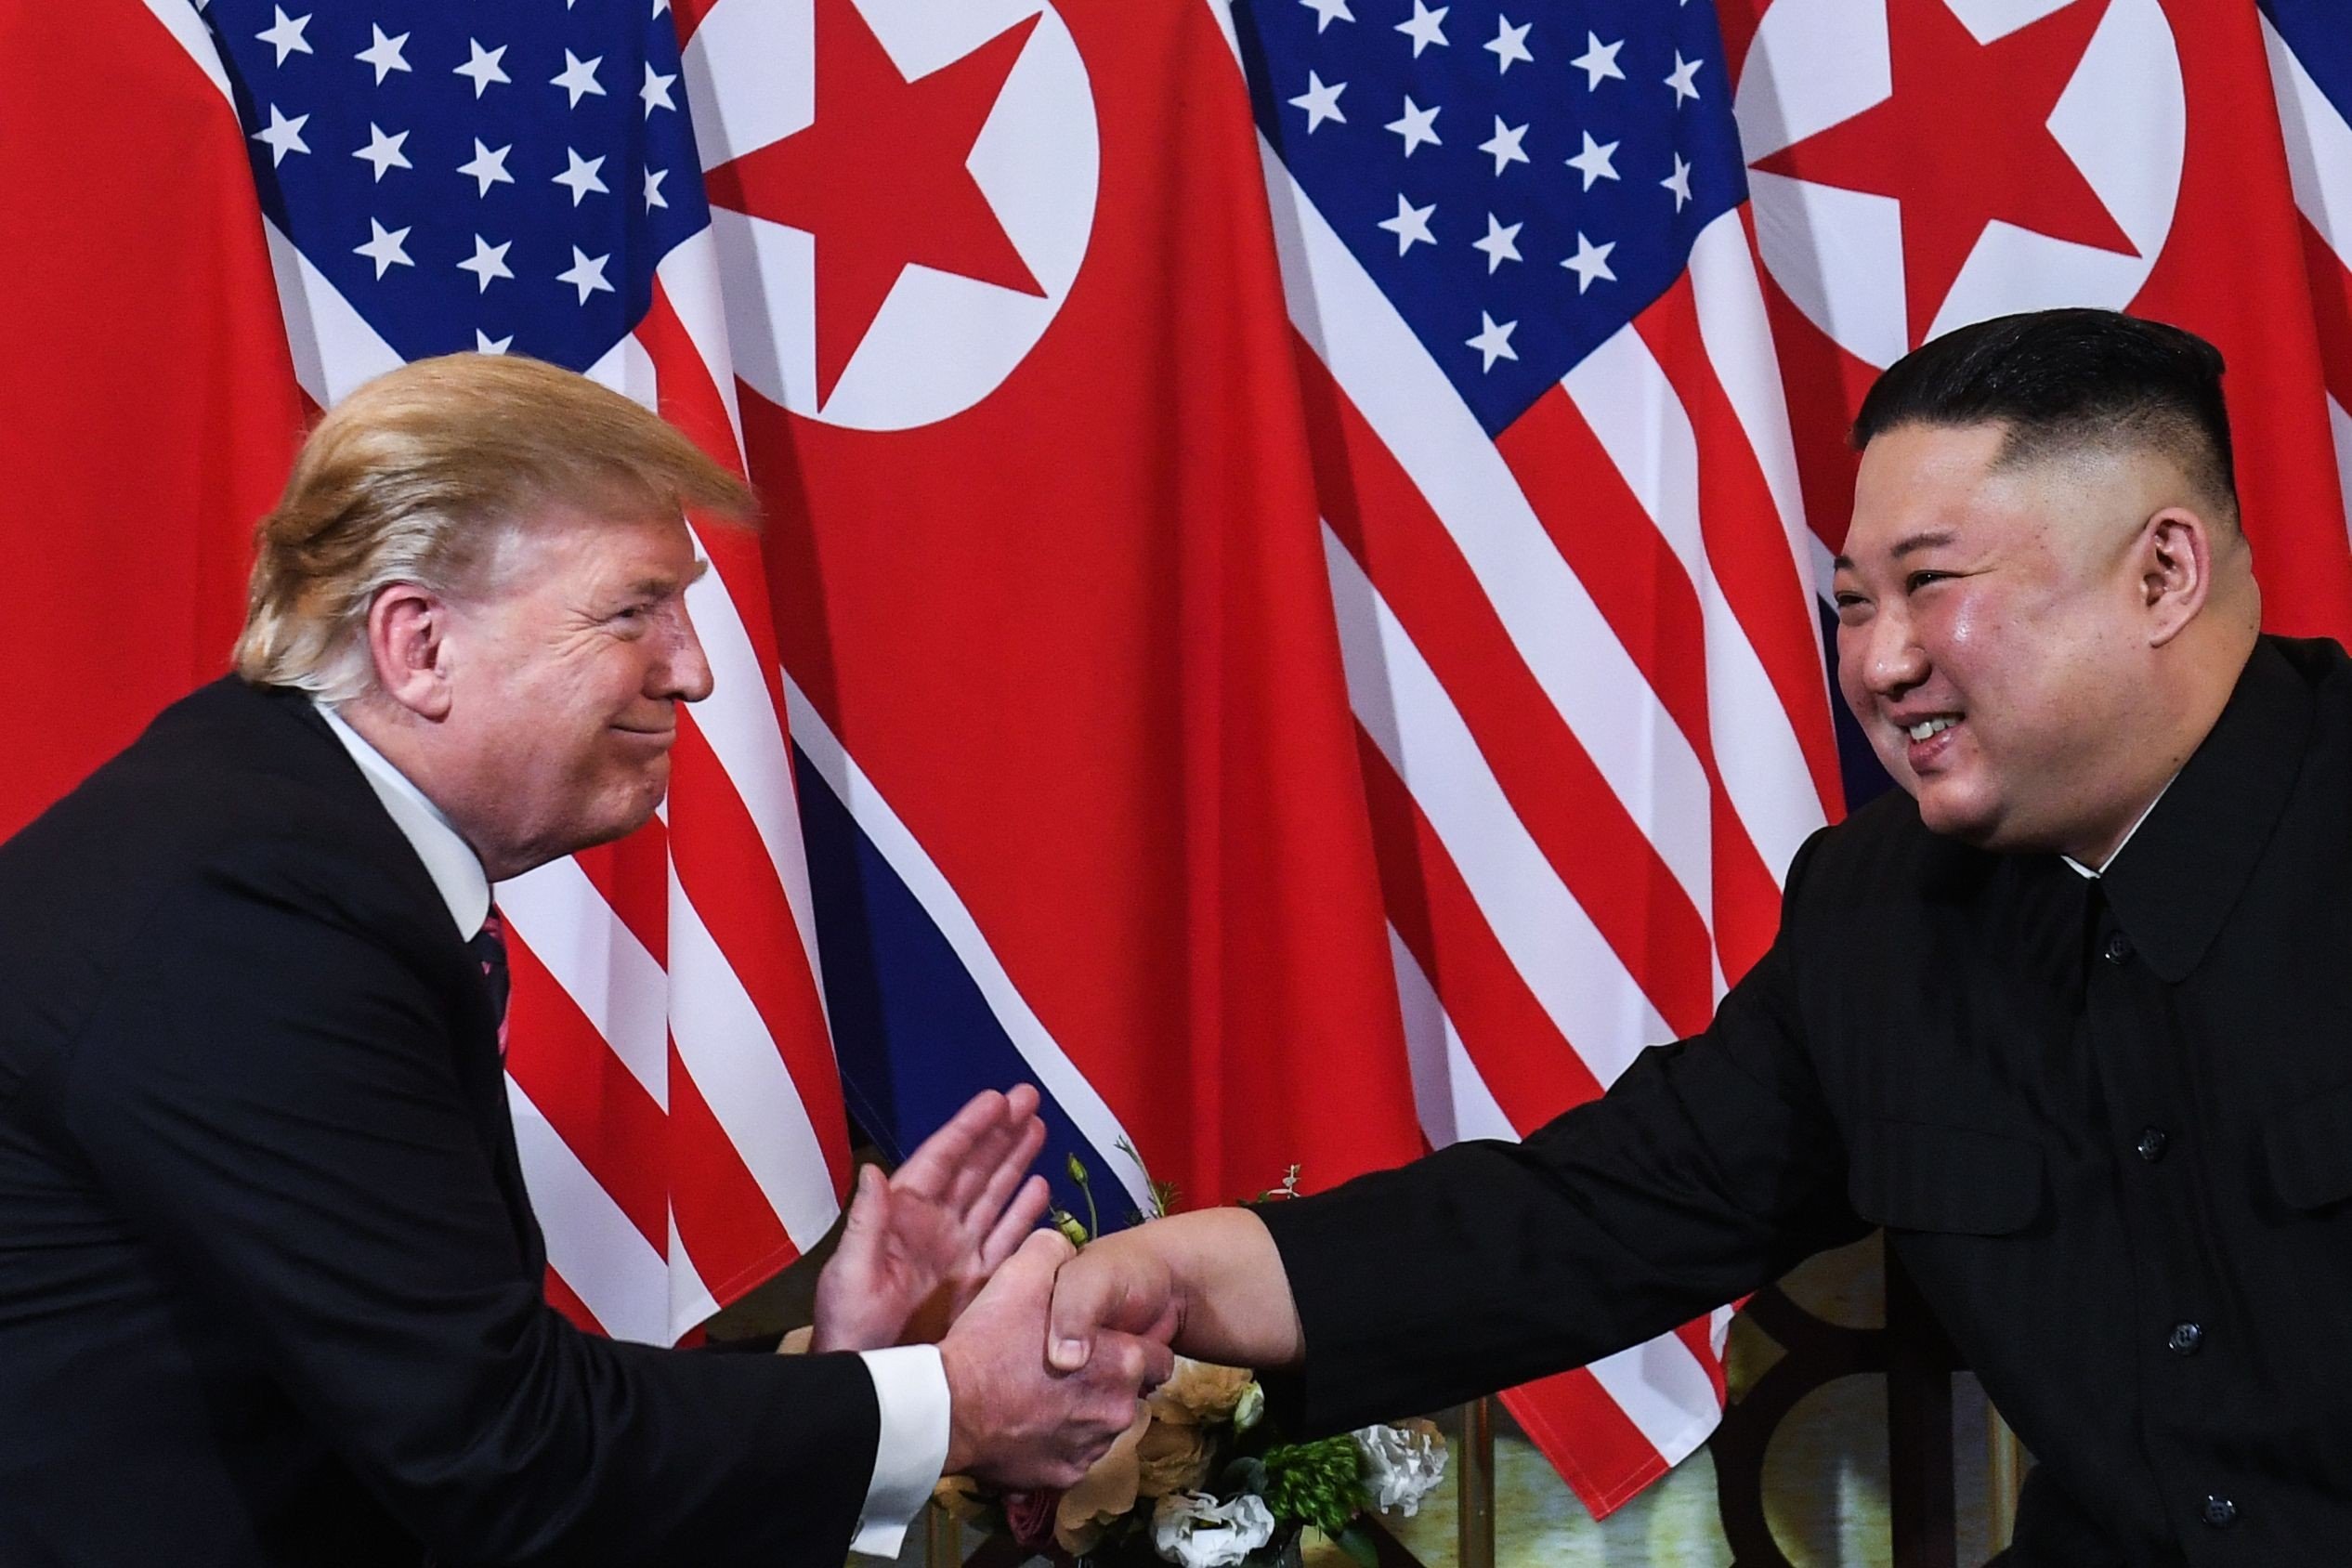 US President Donald Trump and North Korean leader Kim Jong-un shake hands following a meeting in Hanoi, Vietnam, on February 27, 2019. Since then, North Korea has undertaken missile tests and Trump has voiced confidence that Kim will not “break his promise”. Photo: AFP